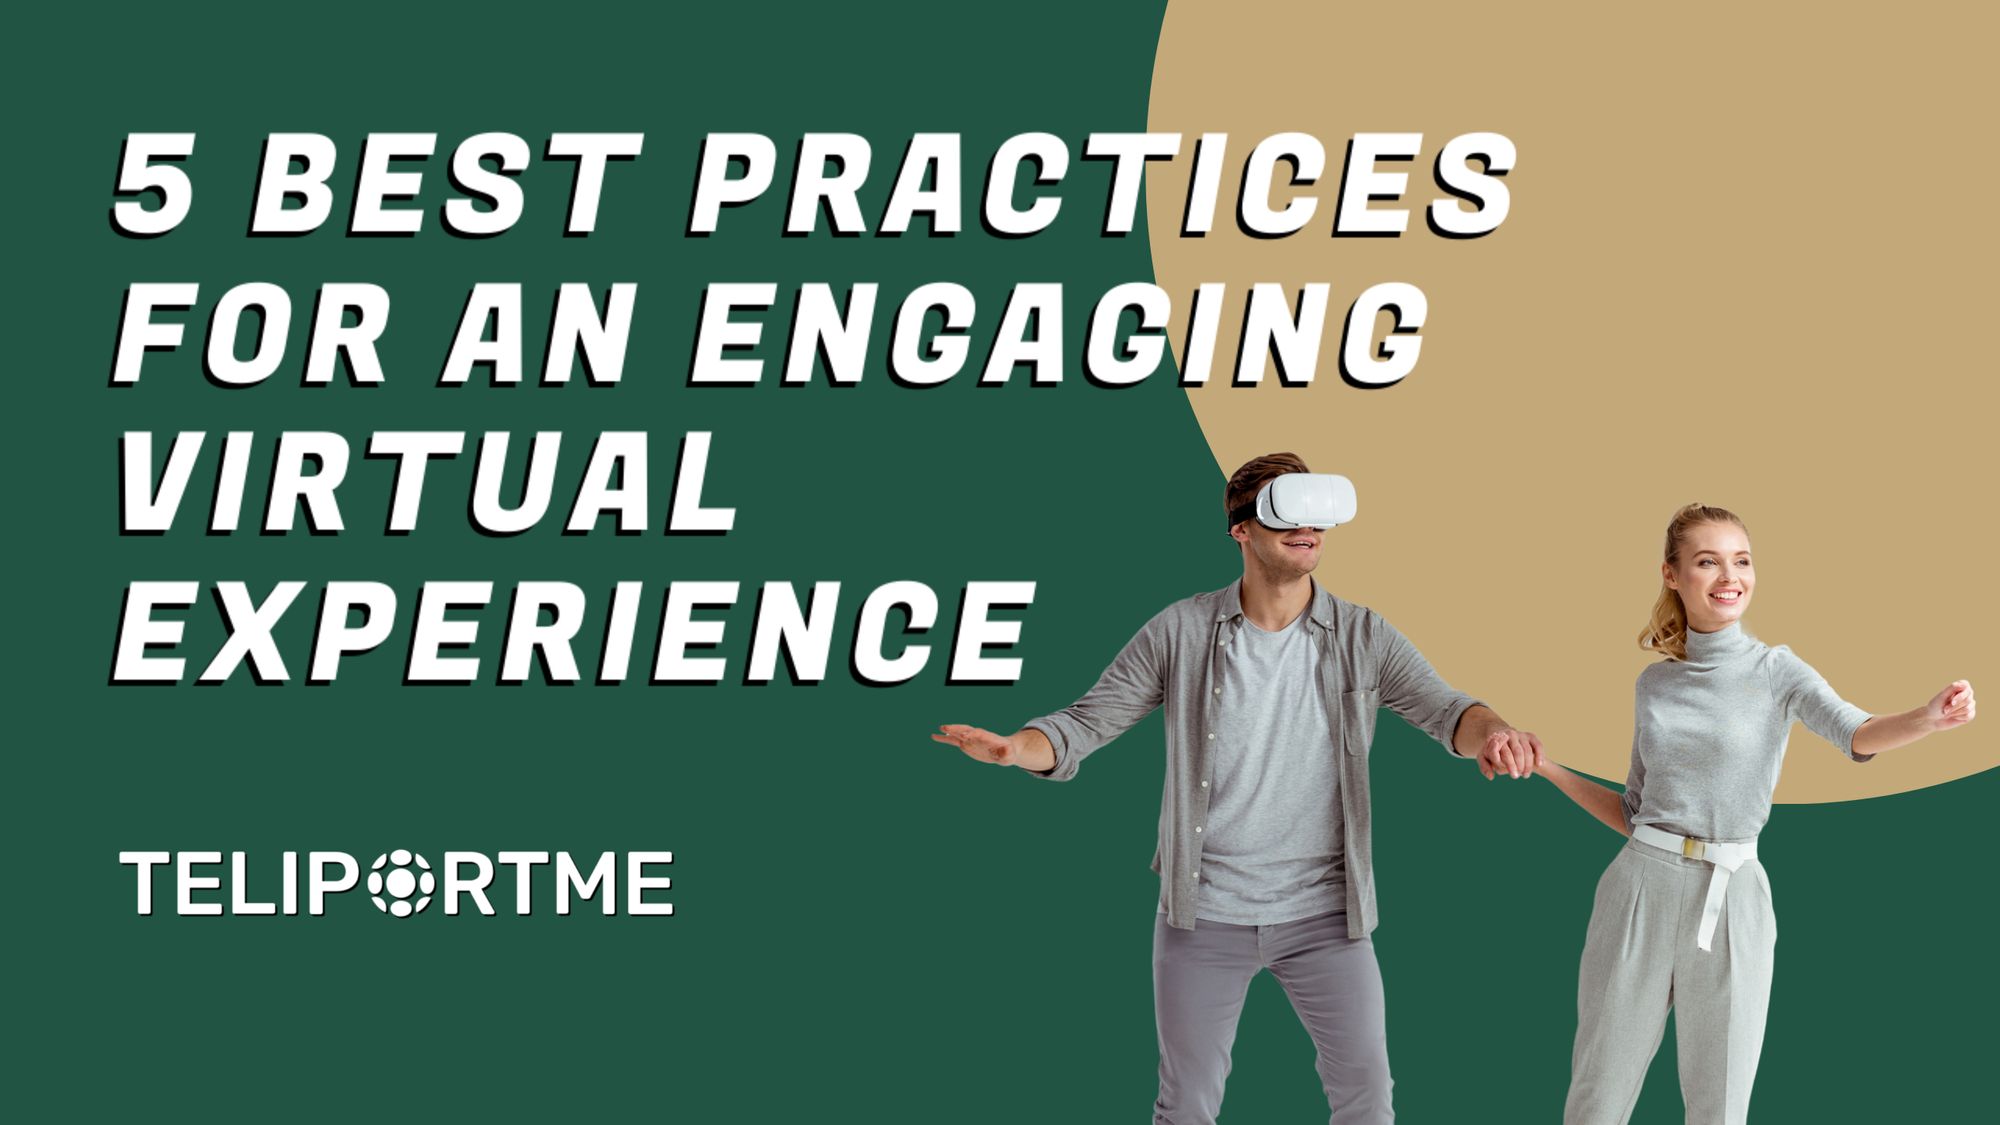 5 Best Practices for an Engaging Virtual Experience